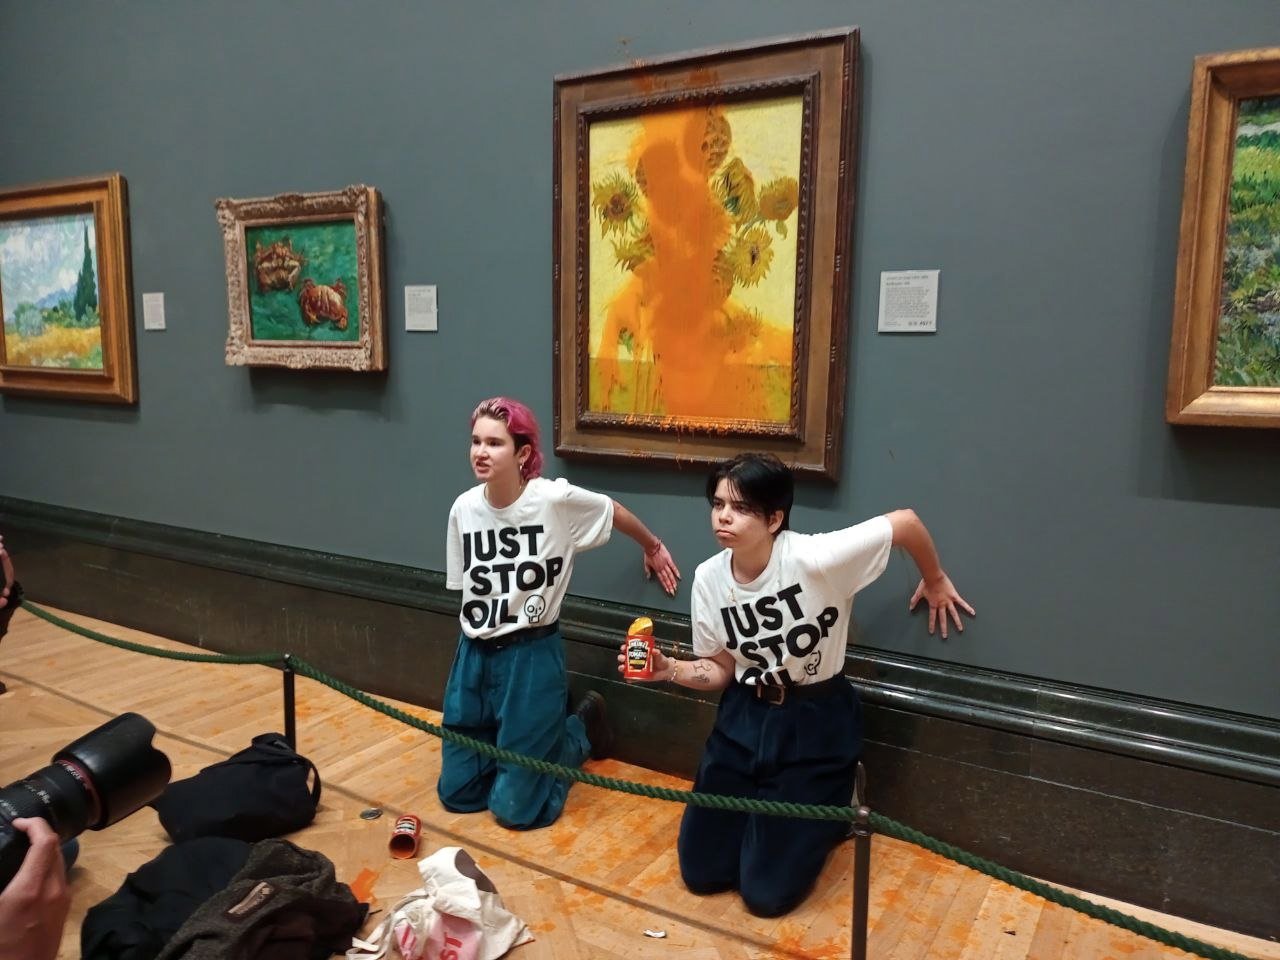 Activists arrested after throwing soup on Van Gogh painting in London |  Daily Sabah